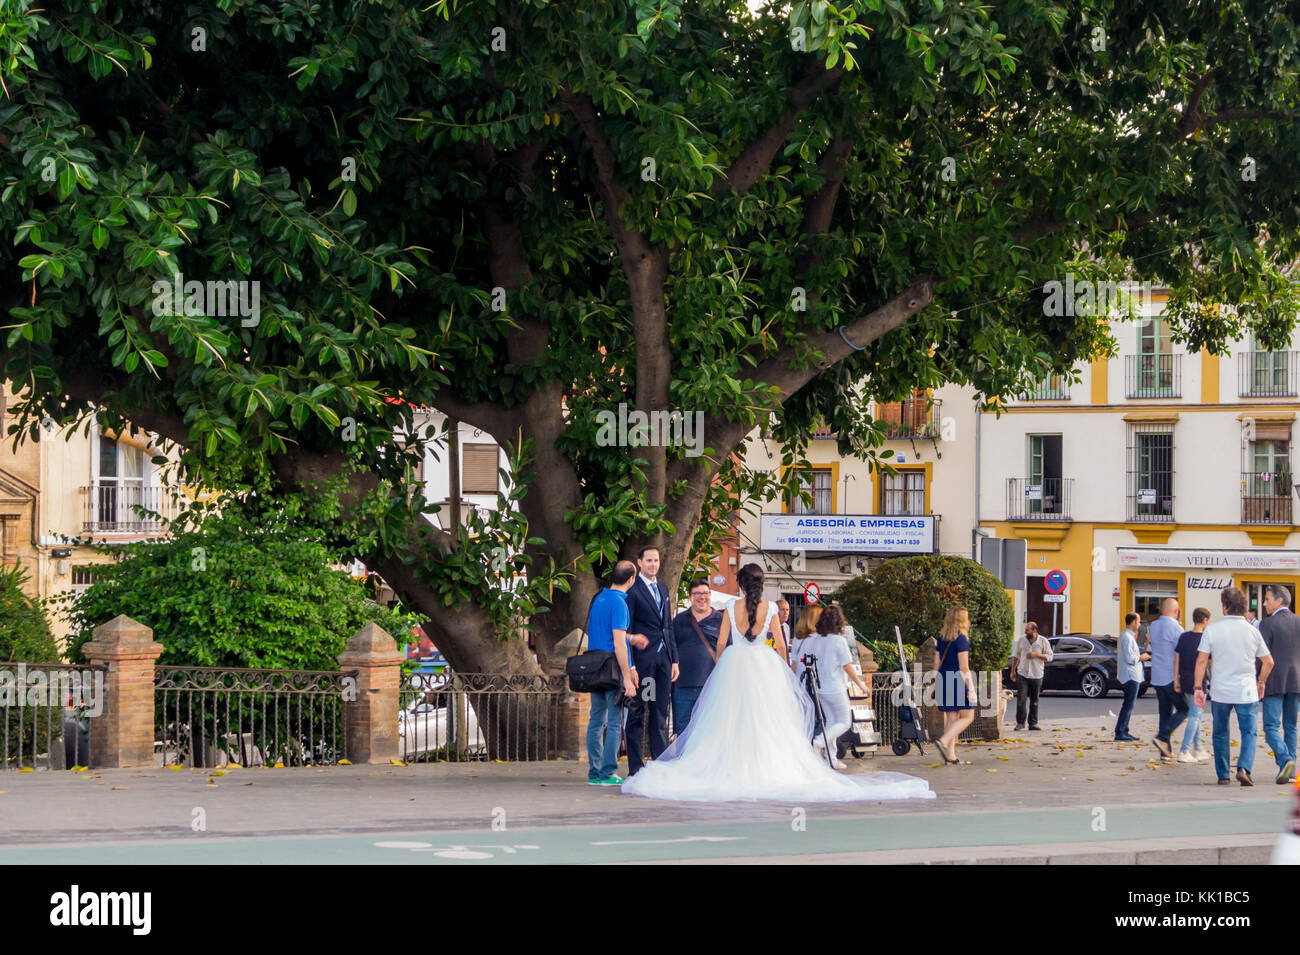 A bride and groom posing for wedding photographs on the Triana bridge, Seville, Andalucia, Spain. Stock Photo